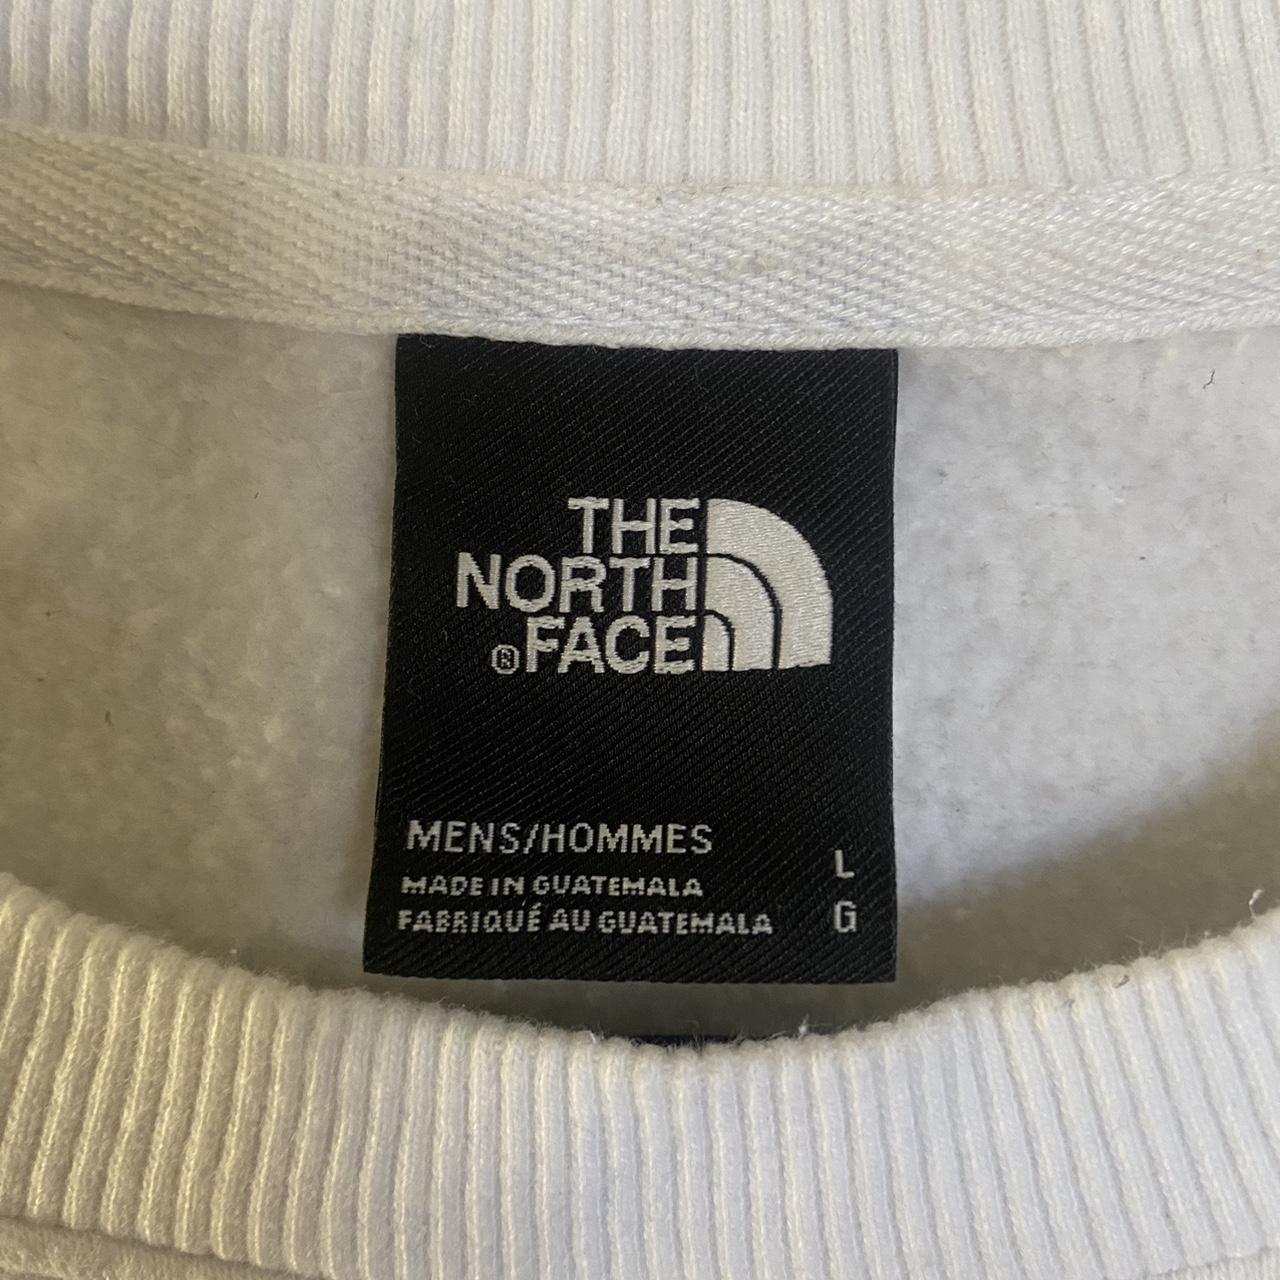 The North Face Sweatshirt Size: L Material:... - Depop